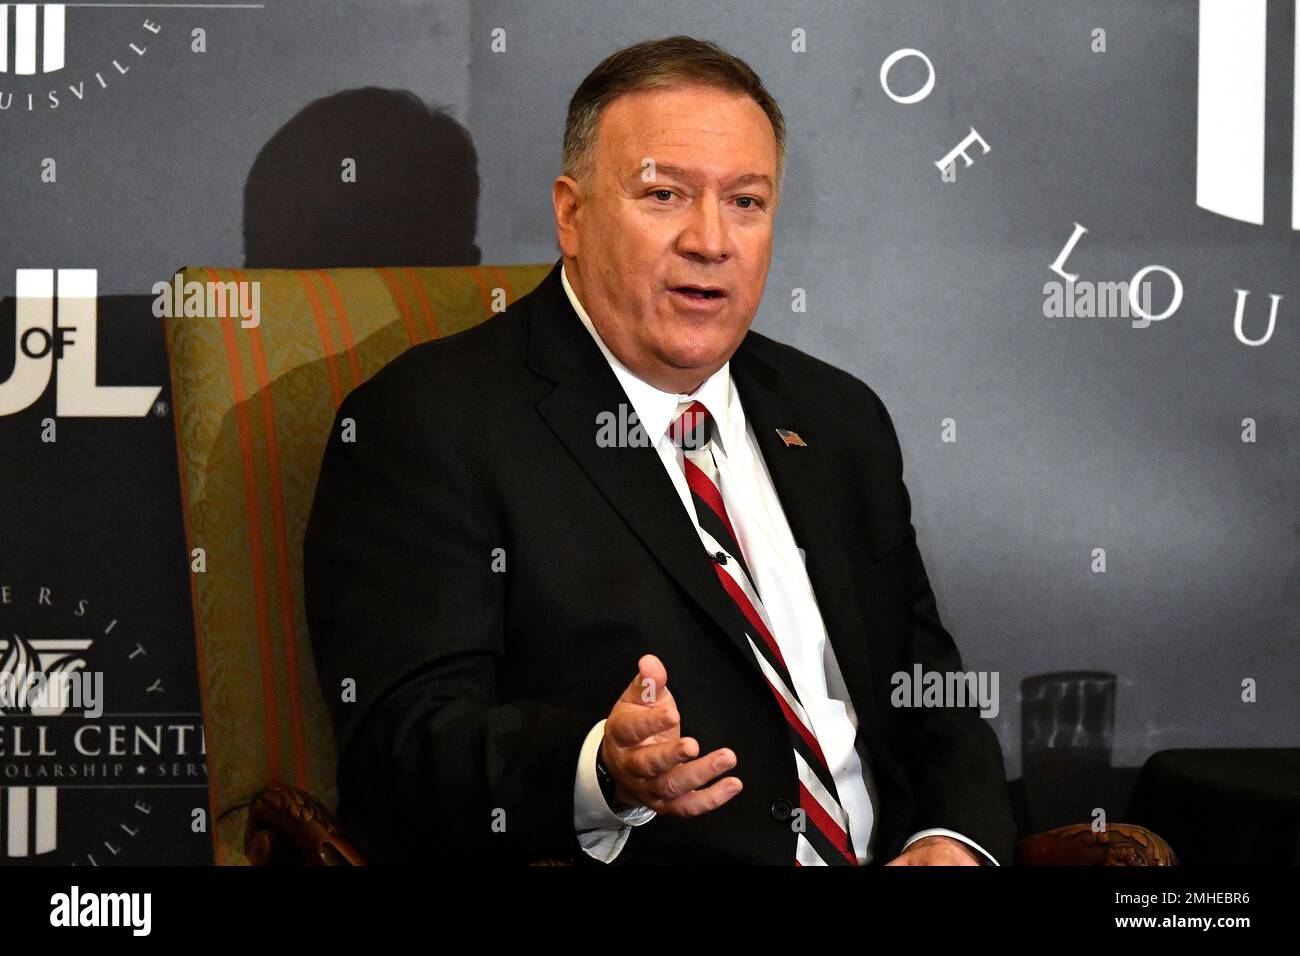 Secretary of State Mike Pompeo speaks at the University of Louisville  McConnell Center's Distinguished Speaker Series in Louisville, Ky., Monday,  Dec. 2, 2019. (AP Photo/Timothy D. Easley Stock Photo - Alamy